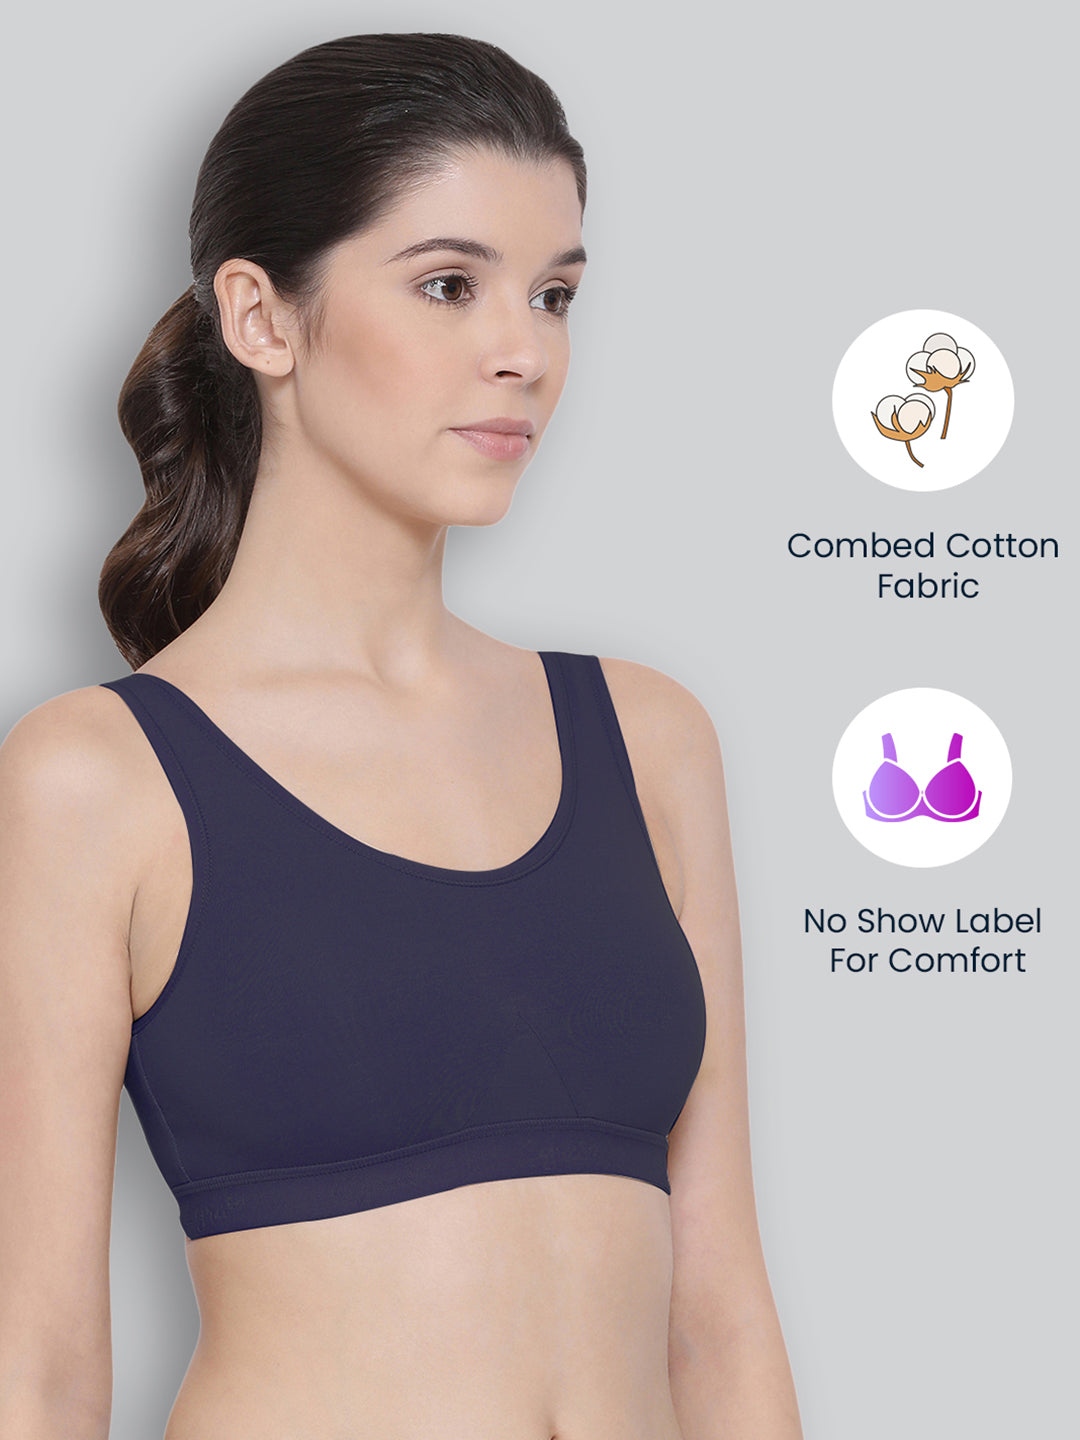 Buy Lyra Women's Non-Padded Sports BRA-531 Sports Bra 531_2PC_White Grey_M  Online In India At Discounted Prices